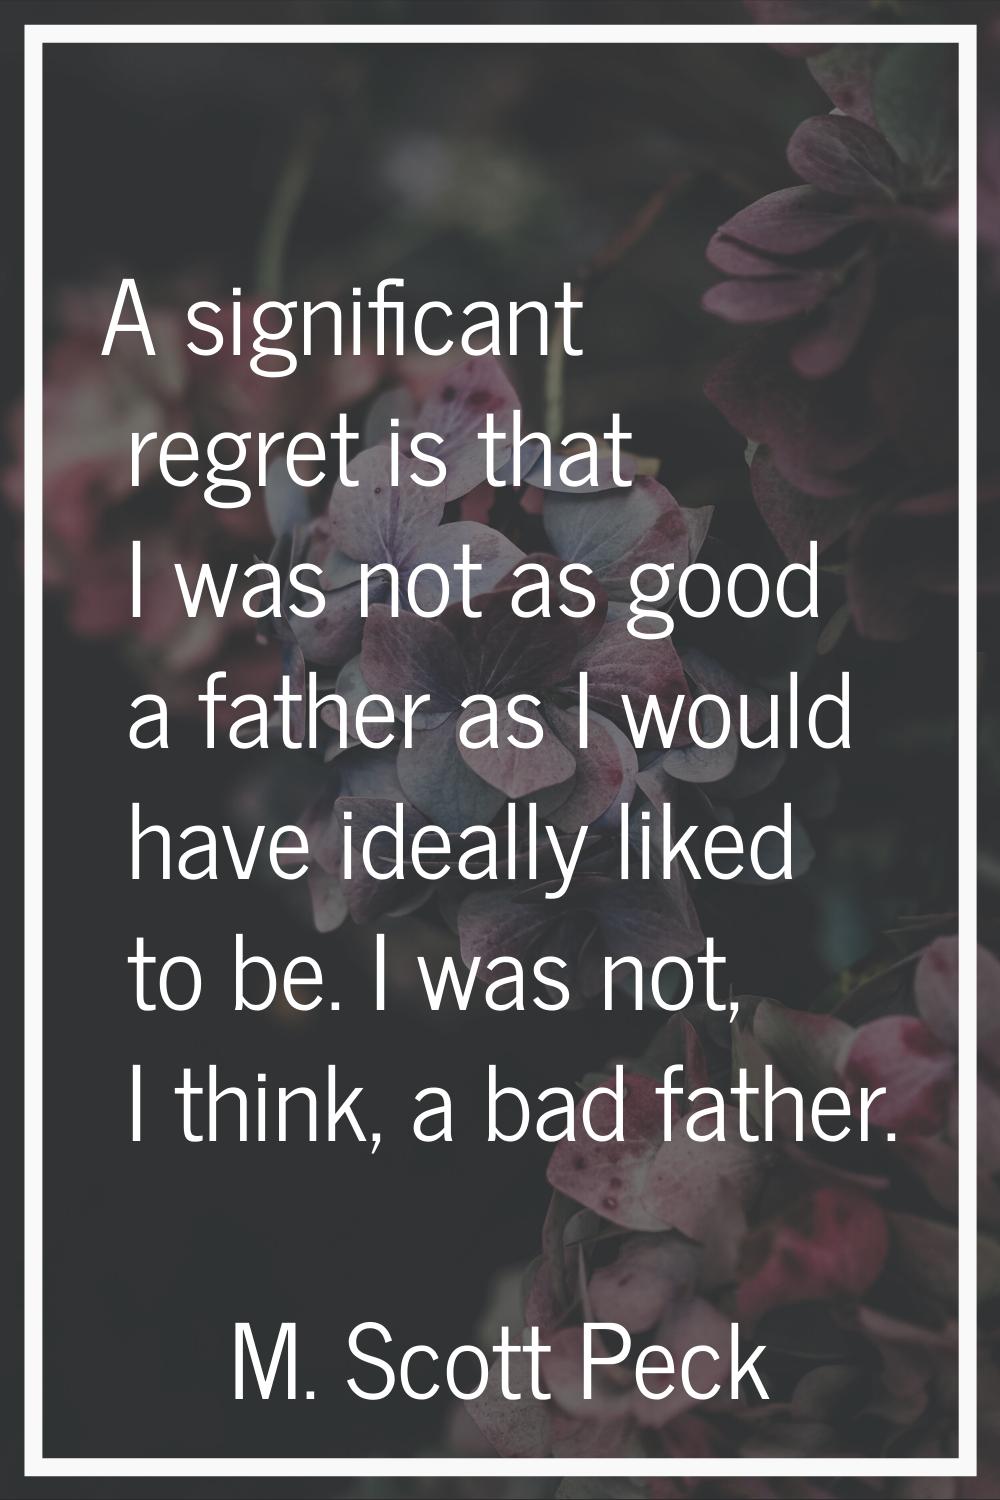 A significant regret is that I was not as good a father as I would have ideally liked to be. I was 